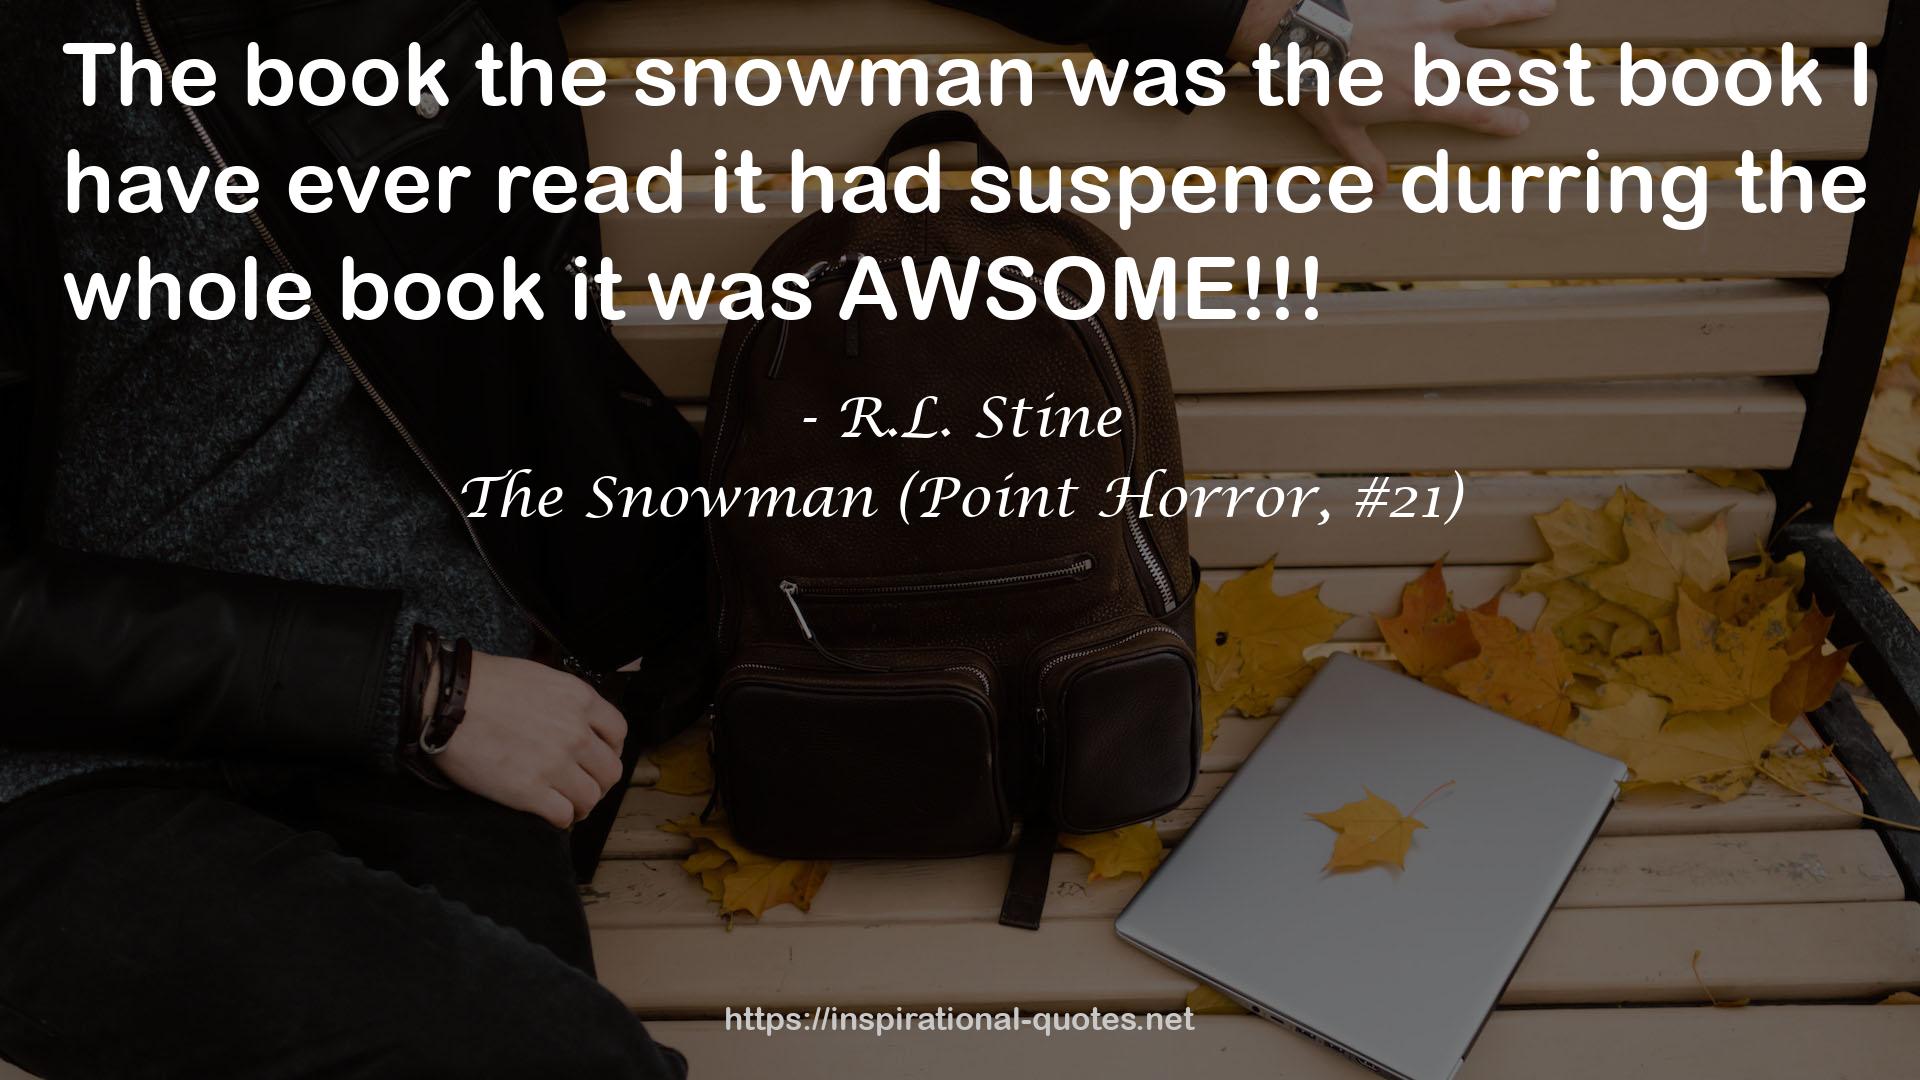 The Snowman (Point Horror, #21) QUOTES